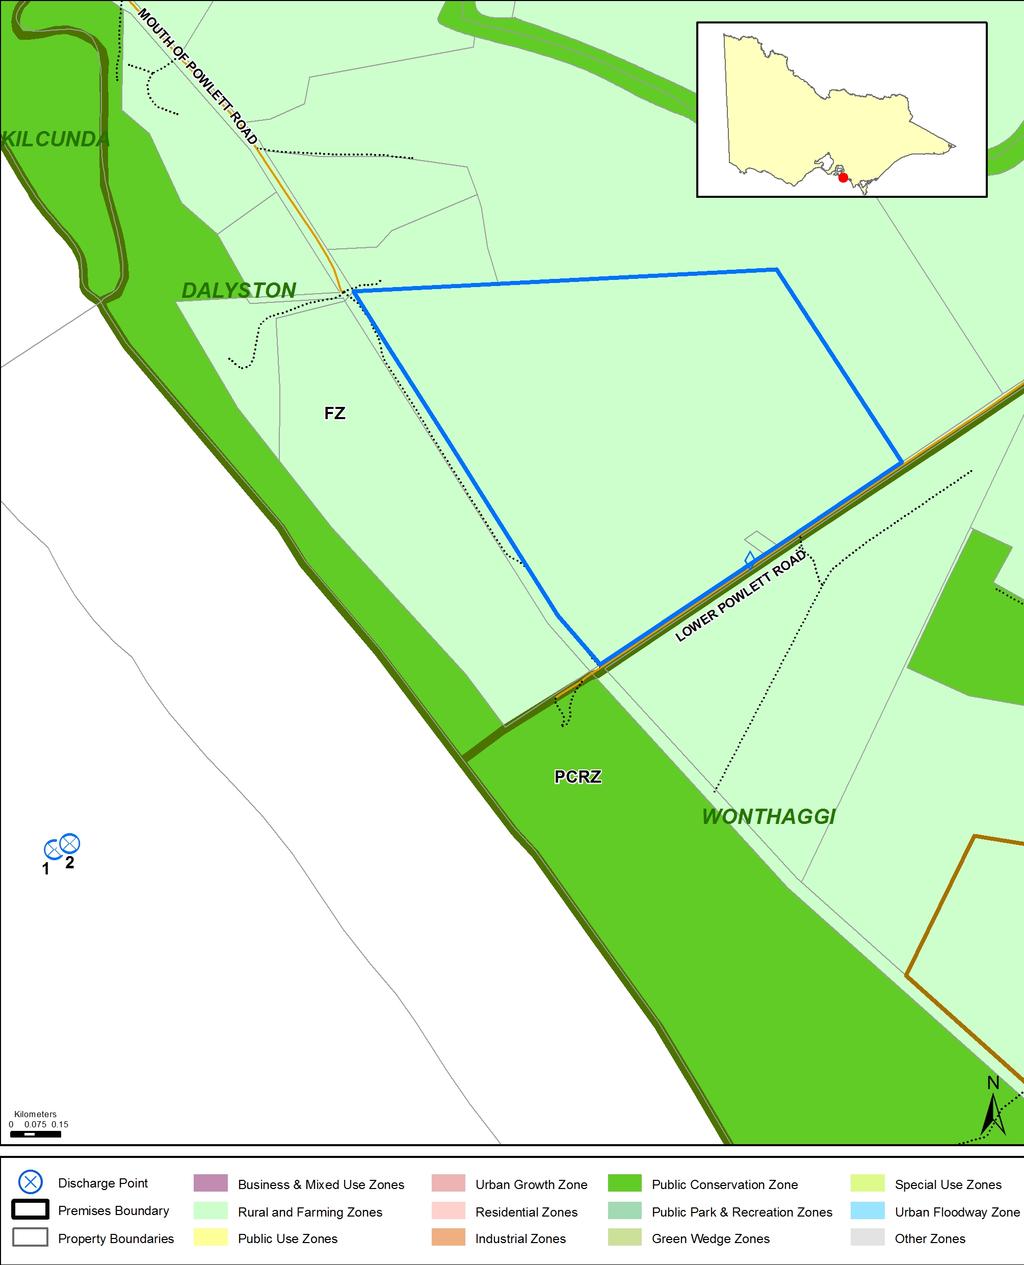 Licence SCHEDULE 1A - LOCALITY PLAN Company Name: AQUASURE PTY LTD ACN: 135 956 393 Premises Address: 434 LOWER POWLETT RD, DALYSTON VIC 3992 Issued: 30/11/2012 Before relying on the information in